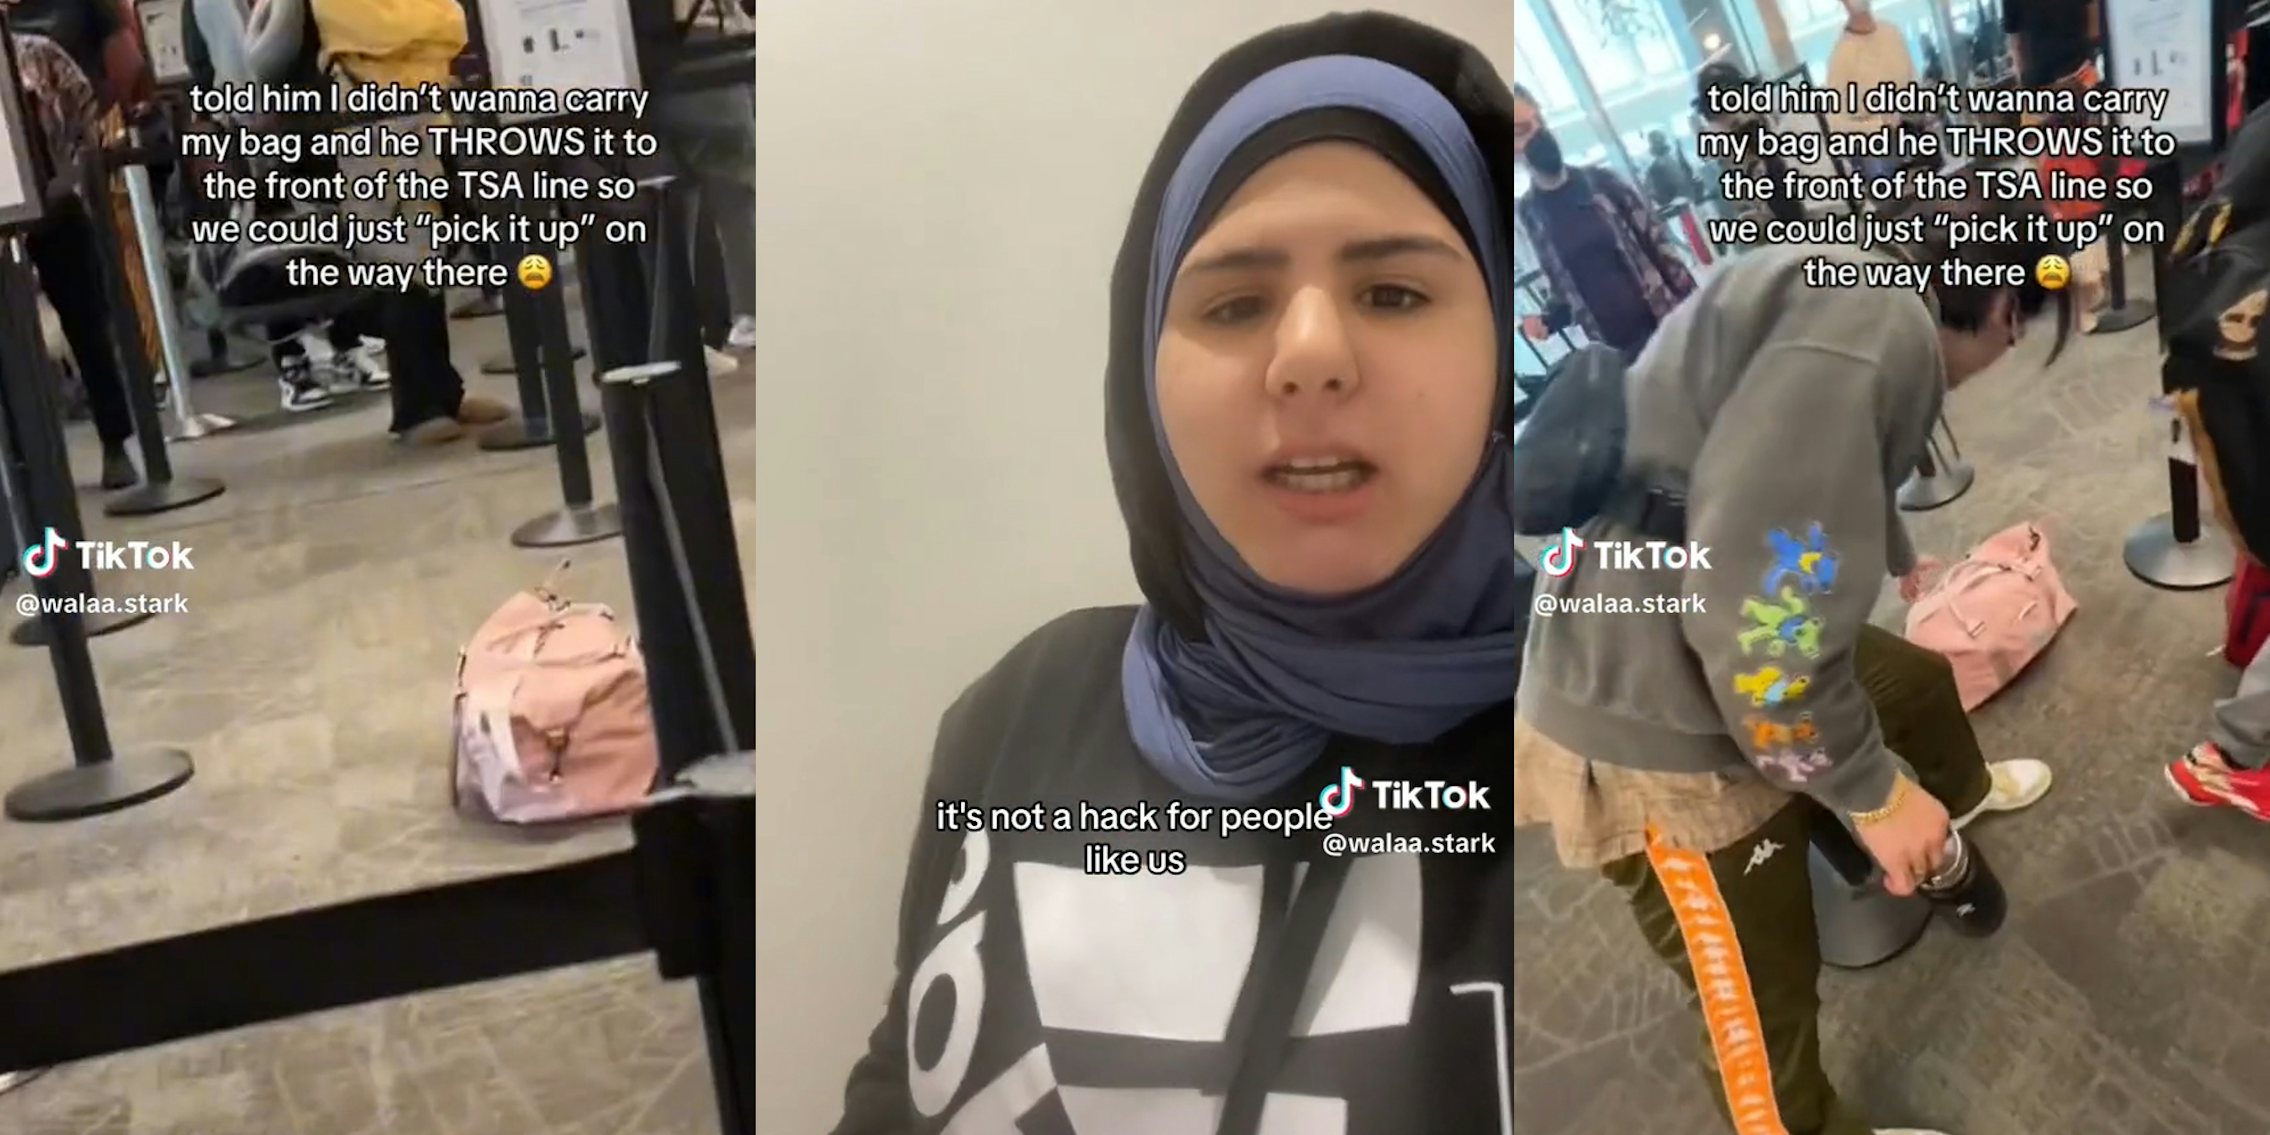 man throws his girlfriend's luggage to front of TSA line (l & r) young woman in hijab with quote 'it's not a hack for people like us'